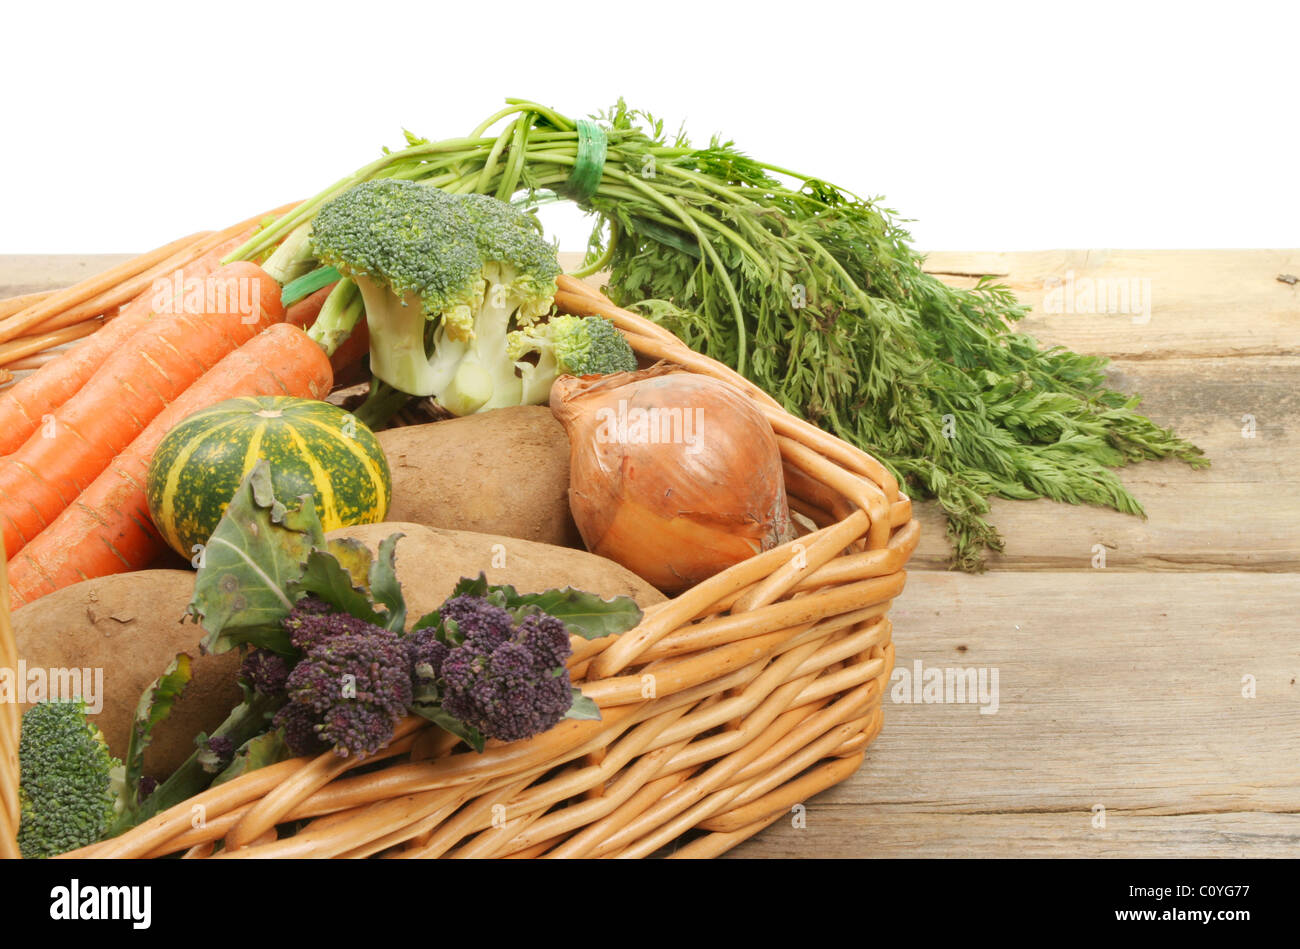 Fresh vegetables in a wicker basket on a wooden bench Stock Photo